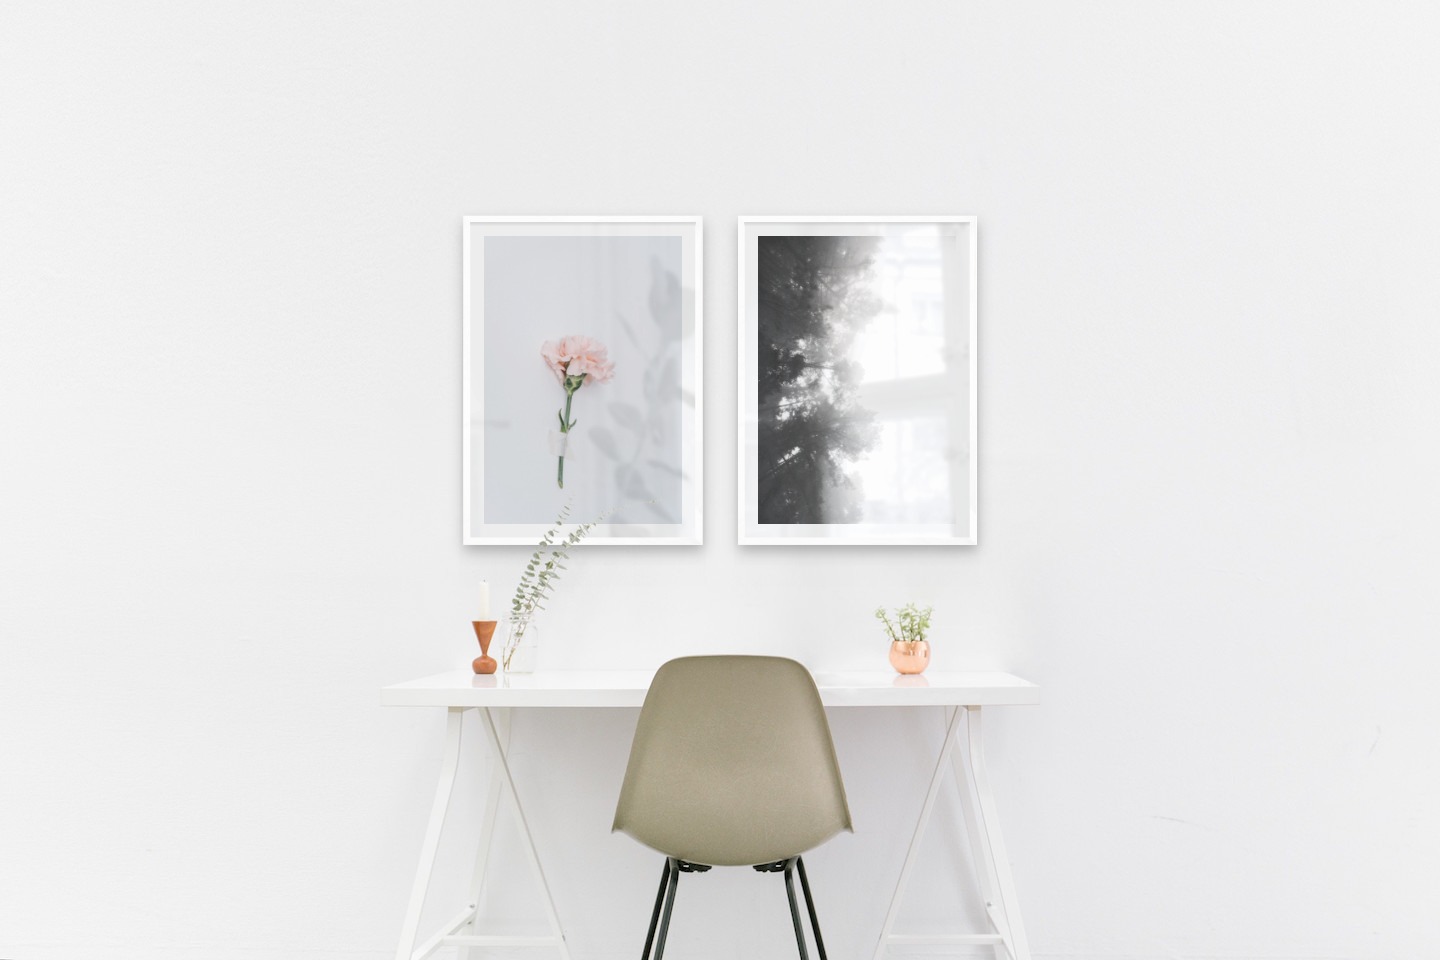 Gallery wall with picture frames in white in sizes 50x70 with prints "Pink flower" and "Foggy wooden tops from the side"